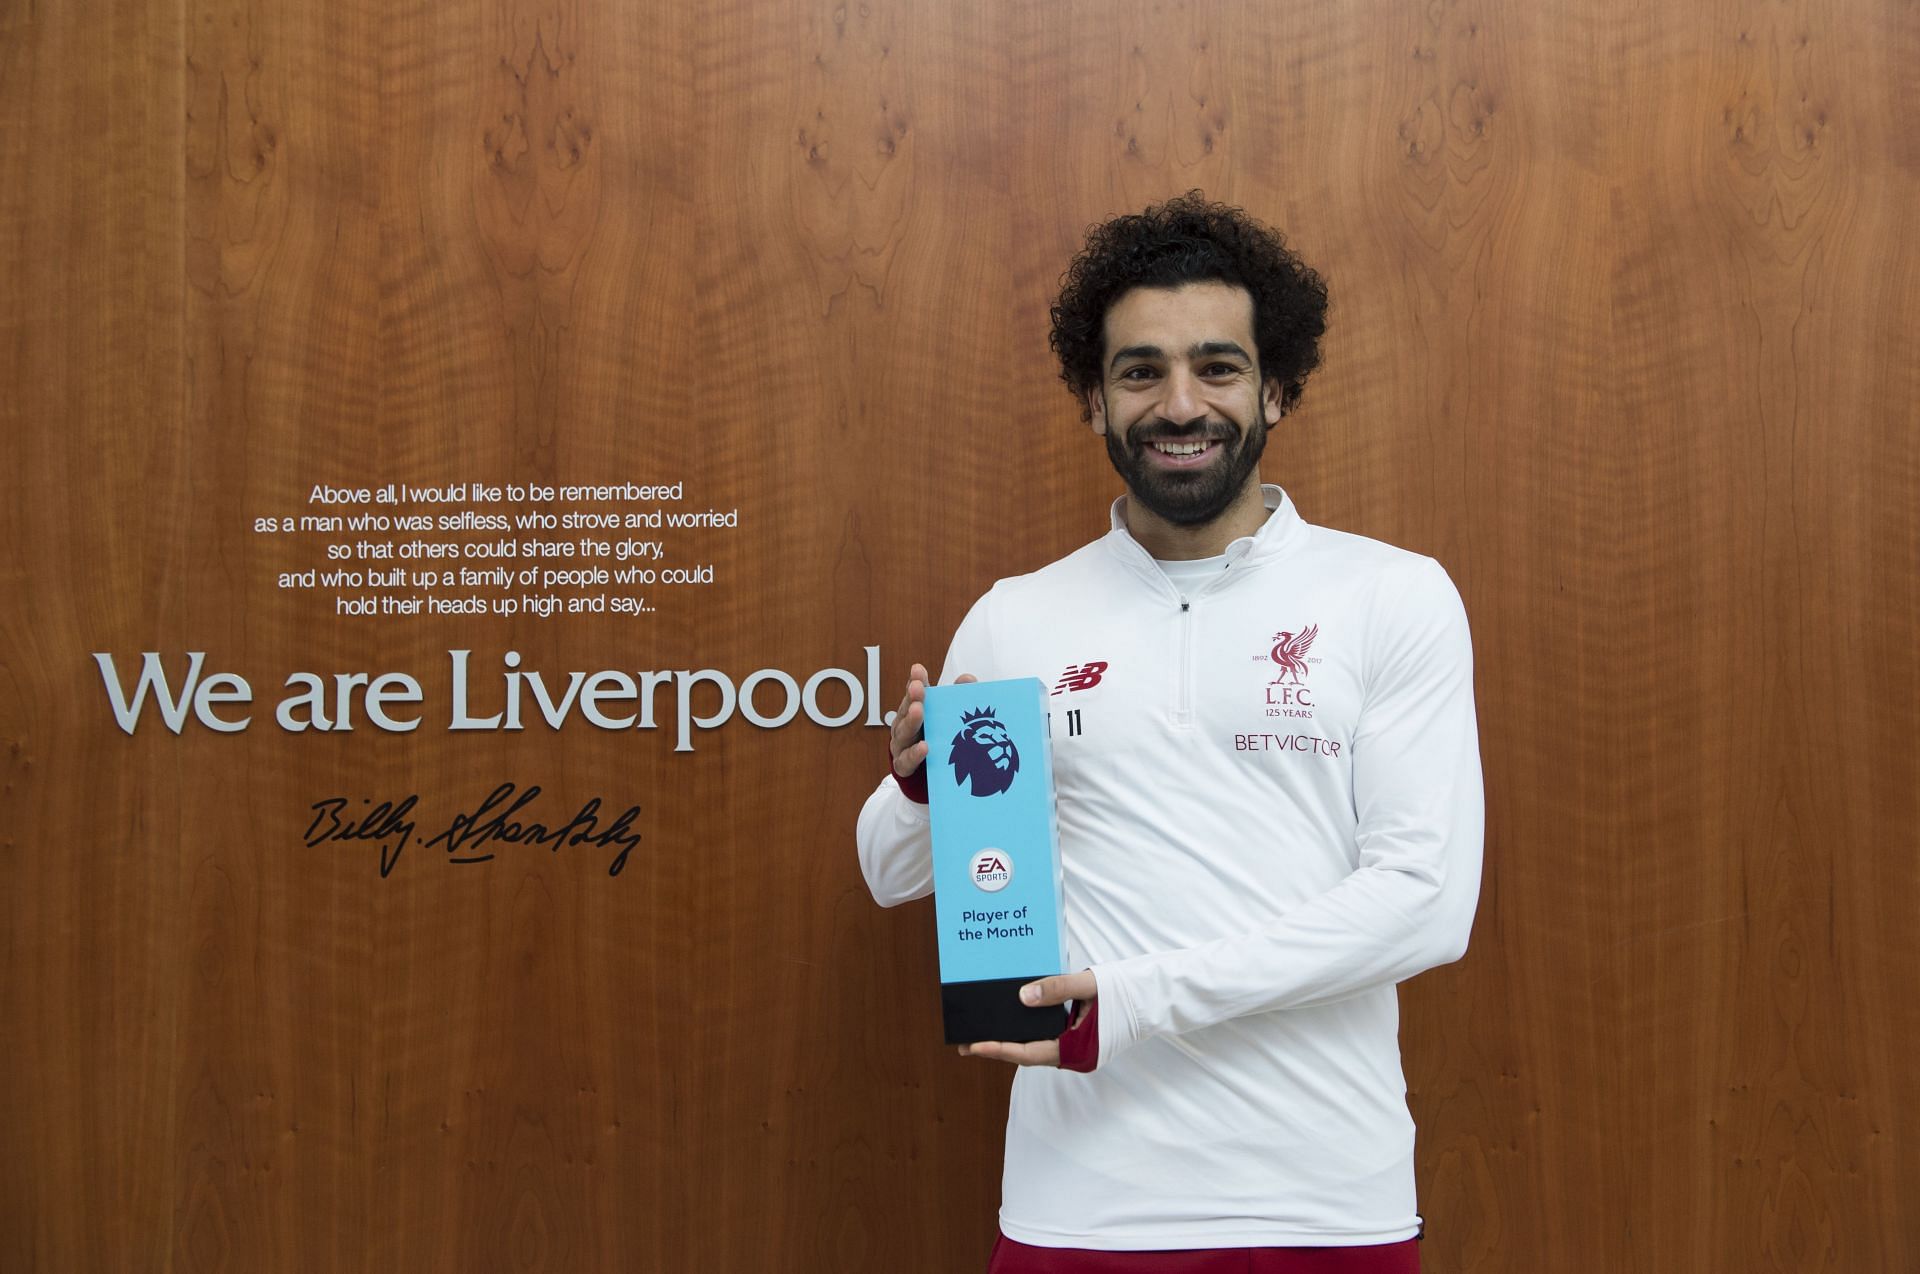 Mohamed Salah is awarded with the Premier League player of the month for February